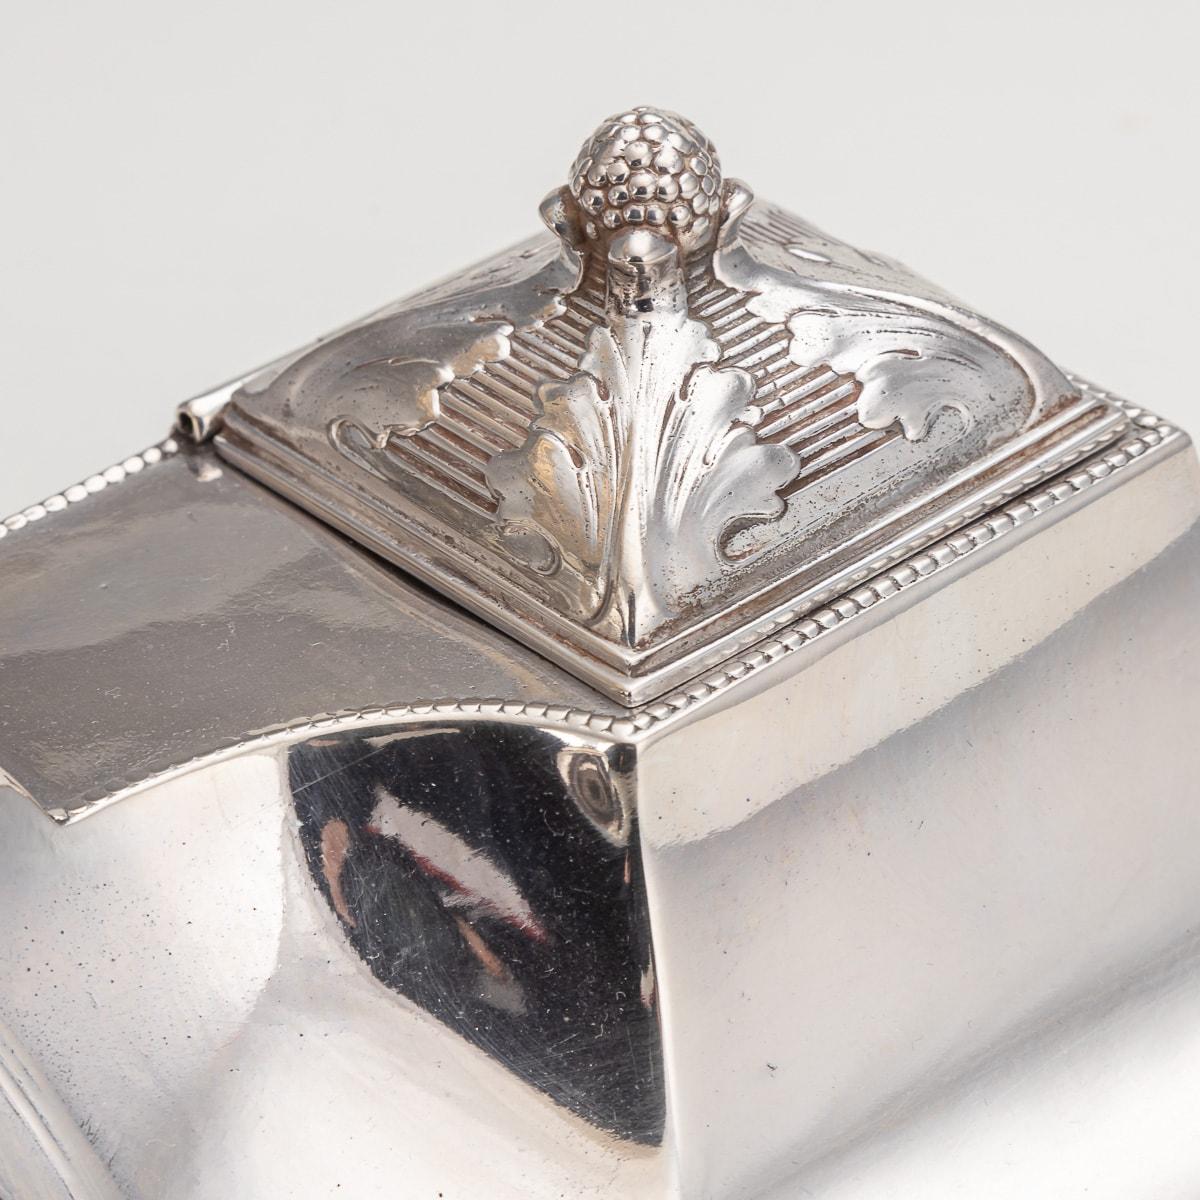 20th Century German Wmf Silver Double Inkwell With Aeroplane Theme, c.1920 8